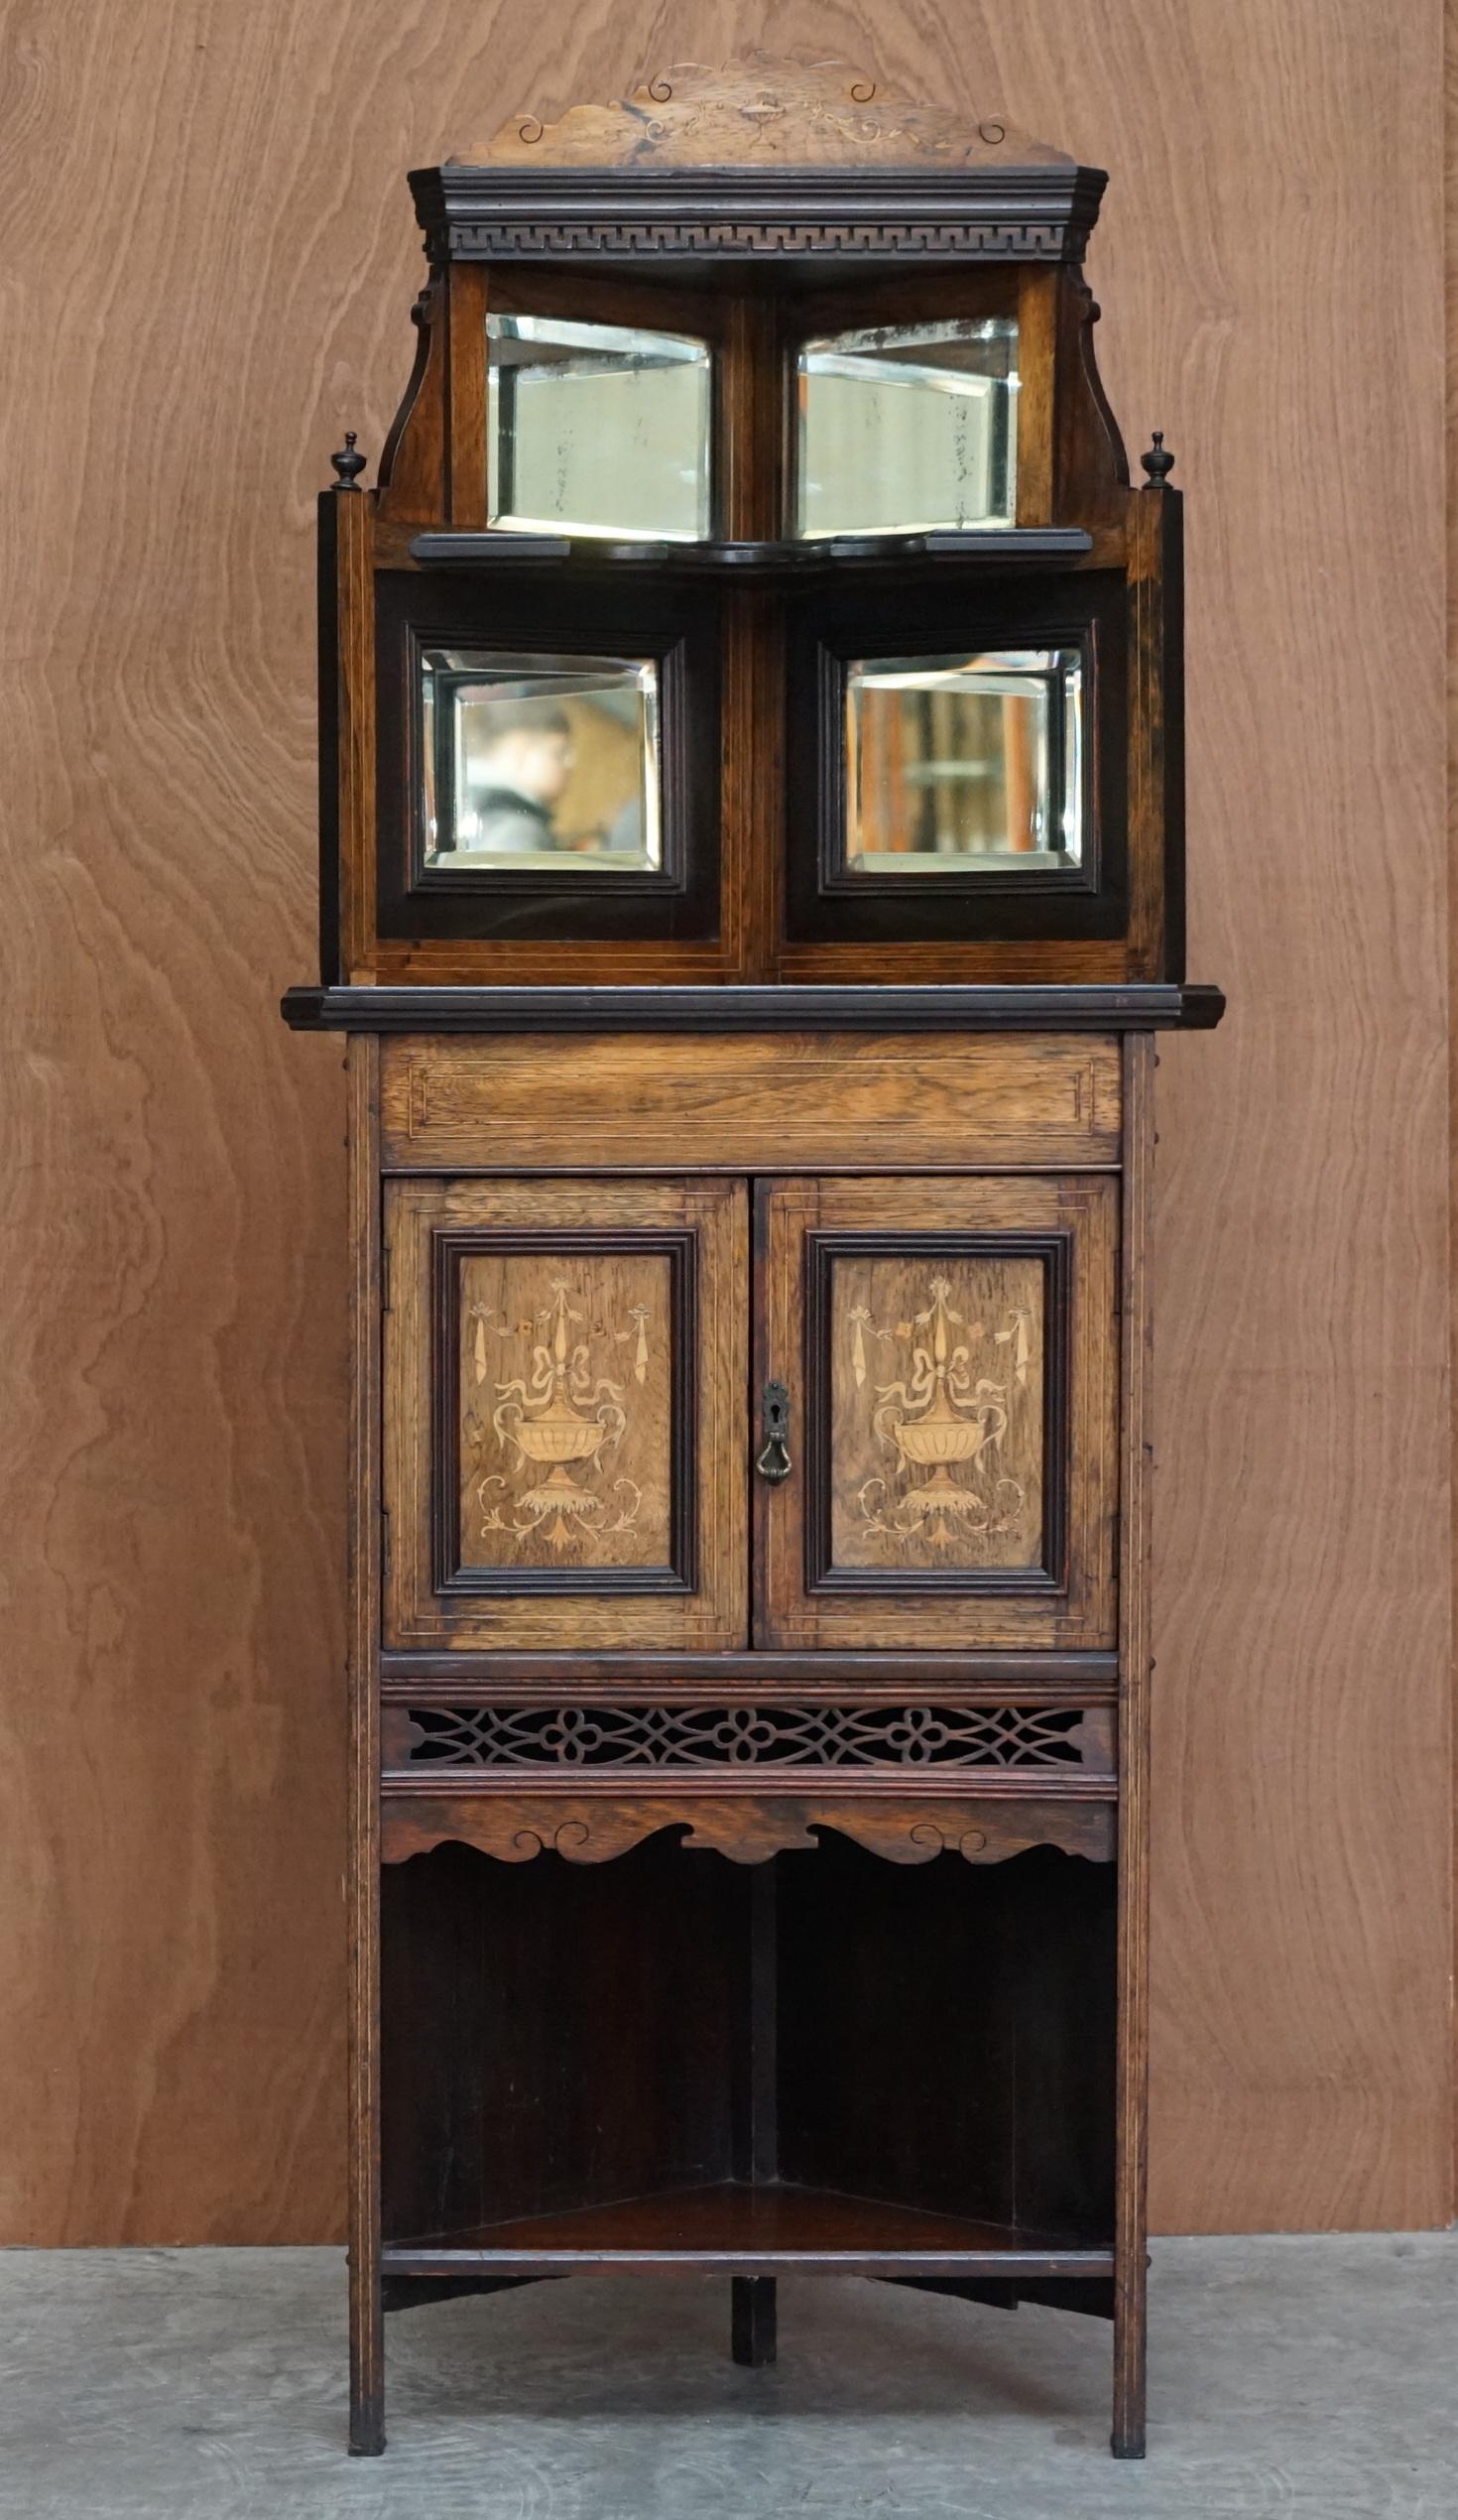 We are delighted to offer for sale this lovely Italian inlaid Rosewood with Boxwood accents Victorian circa 1880 small corner cupboard with original mirror back plates 

A good looking and well made piece, its very decorative, the inlaid is